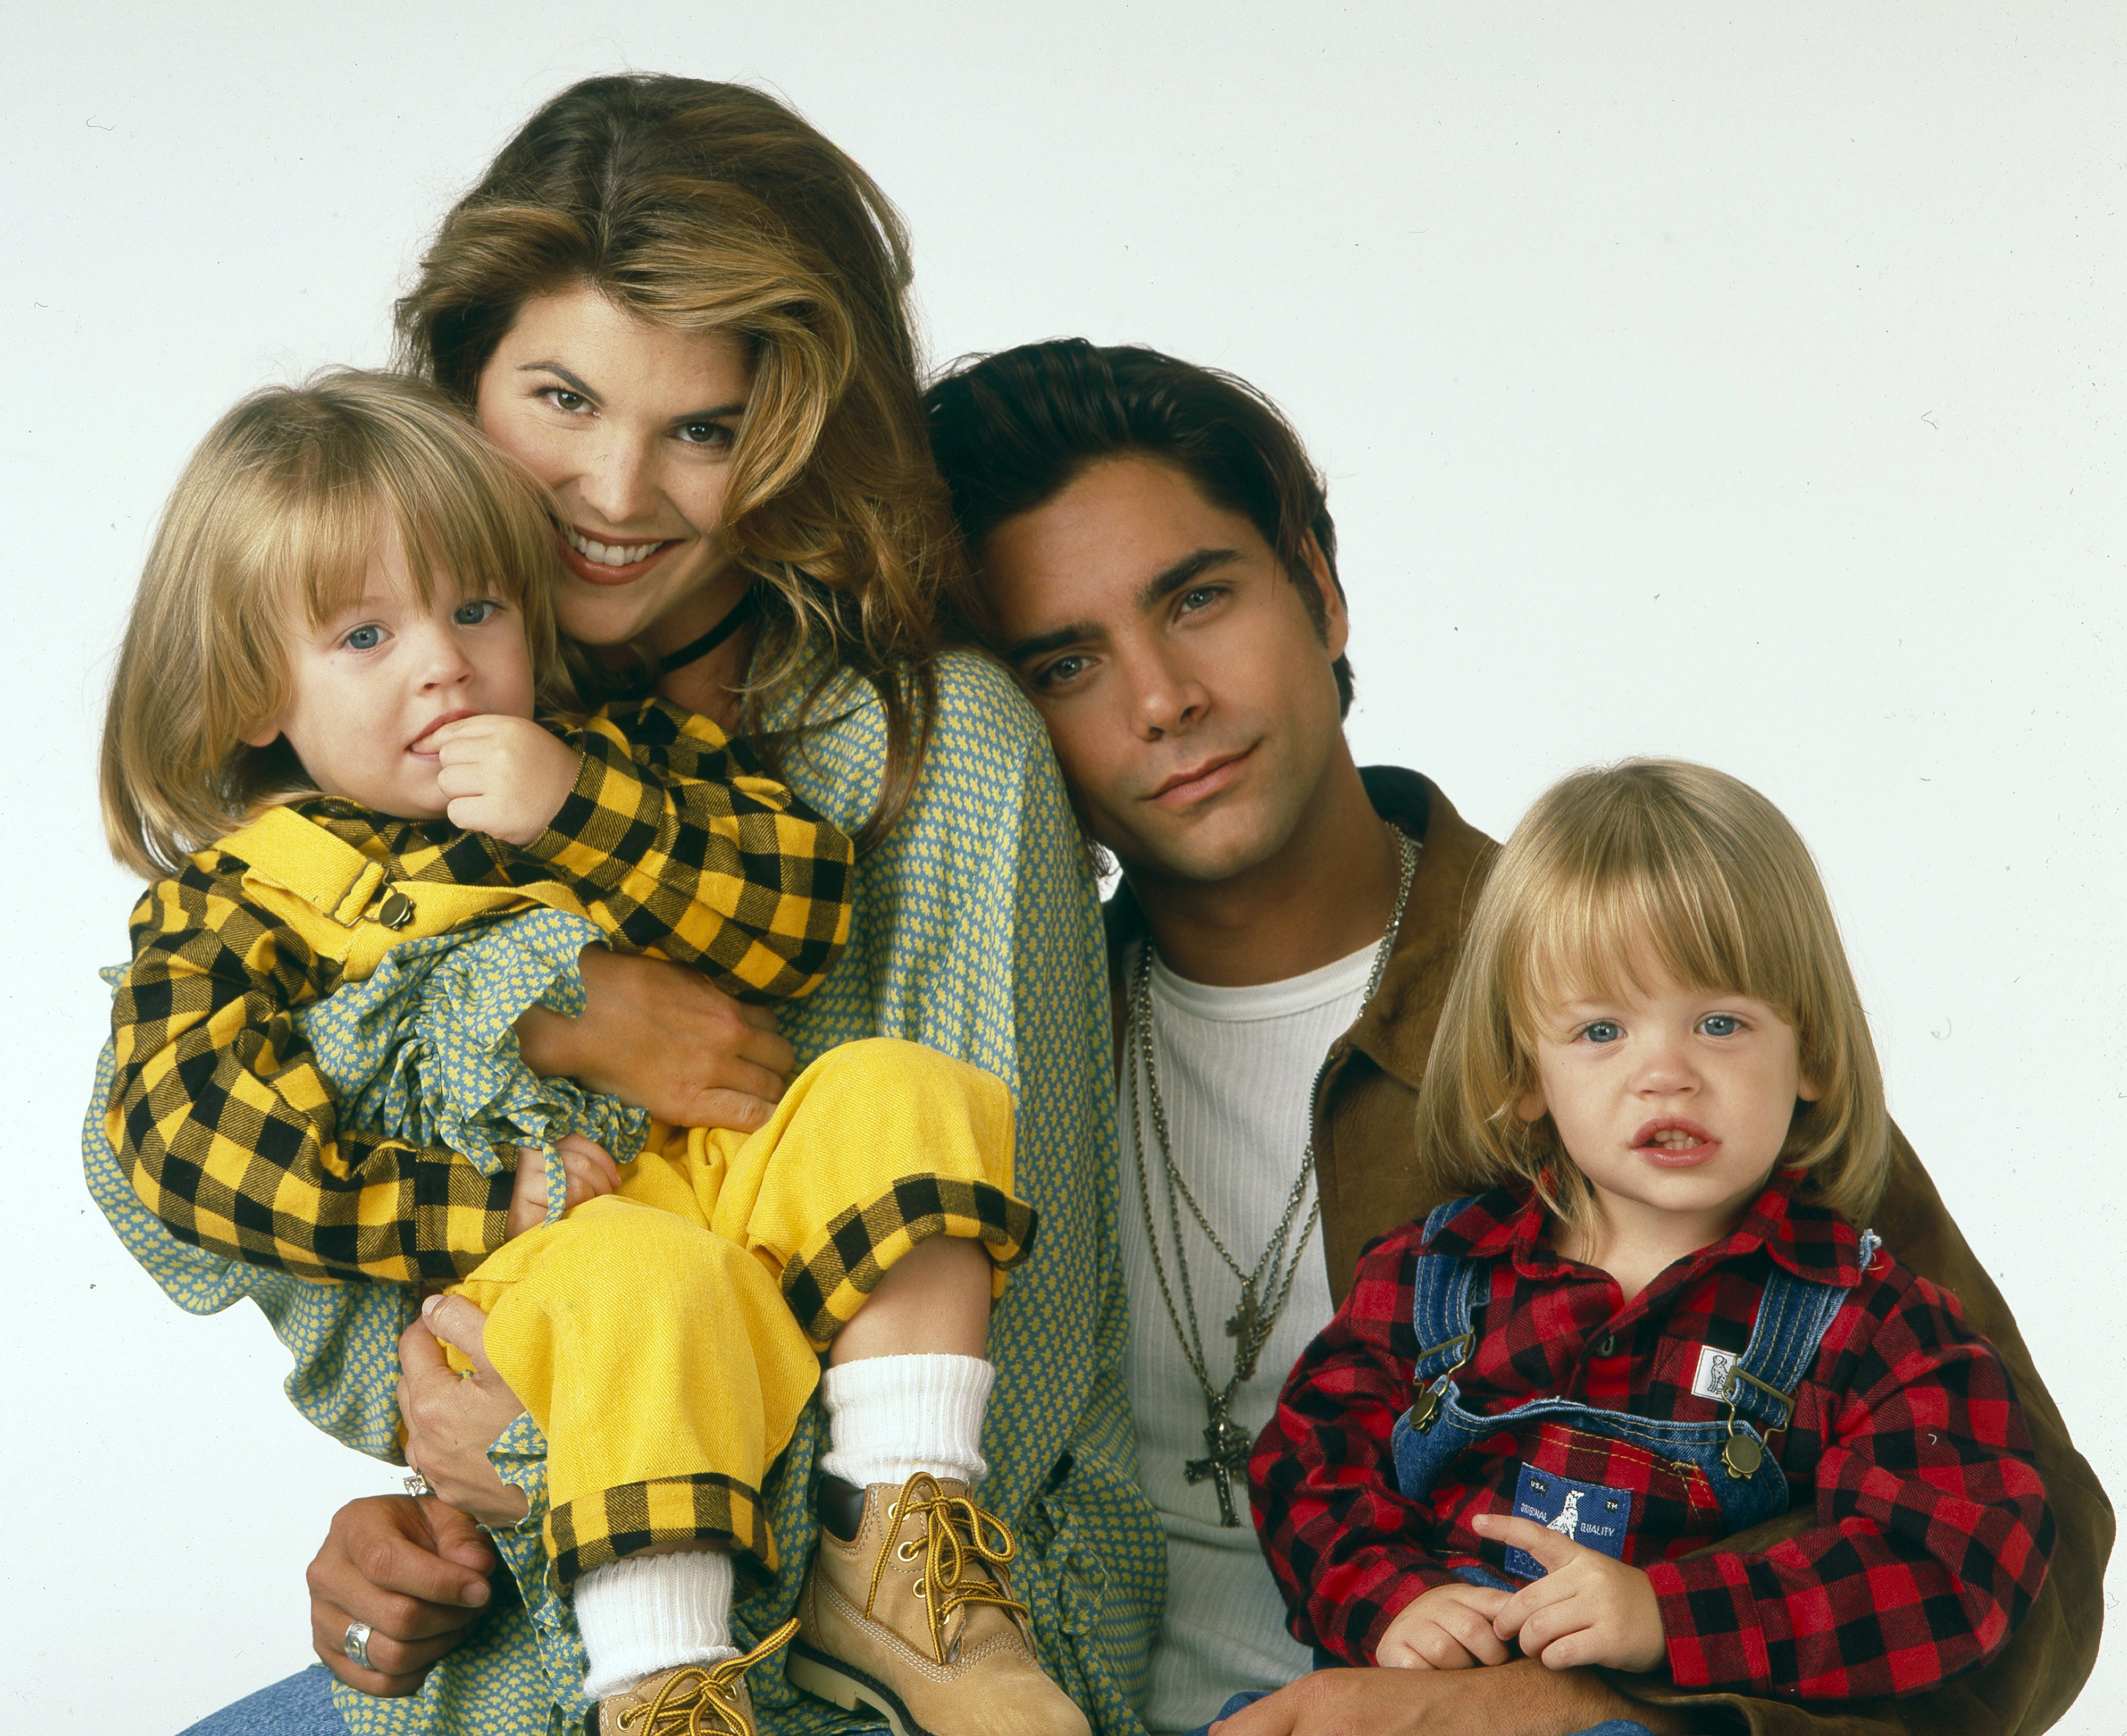 (L-R) Dylan Tuomy-Wilhoit, Lori Loughlin, John Stamos, Blake Tuomy-Wilhoit in promotional photo "Full House," on September 14, 1993 | Source: Getty Images